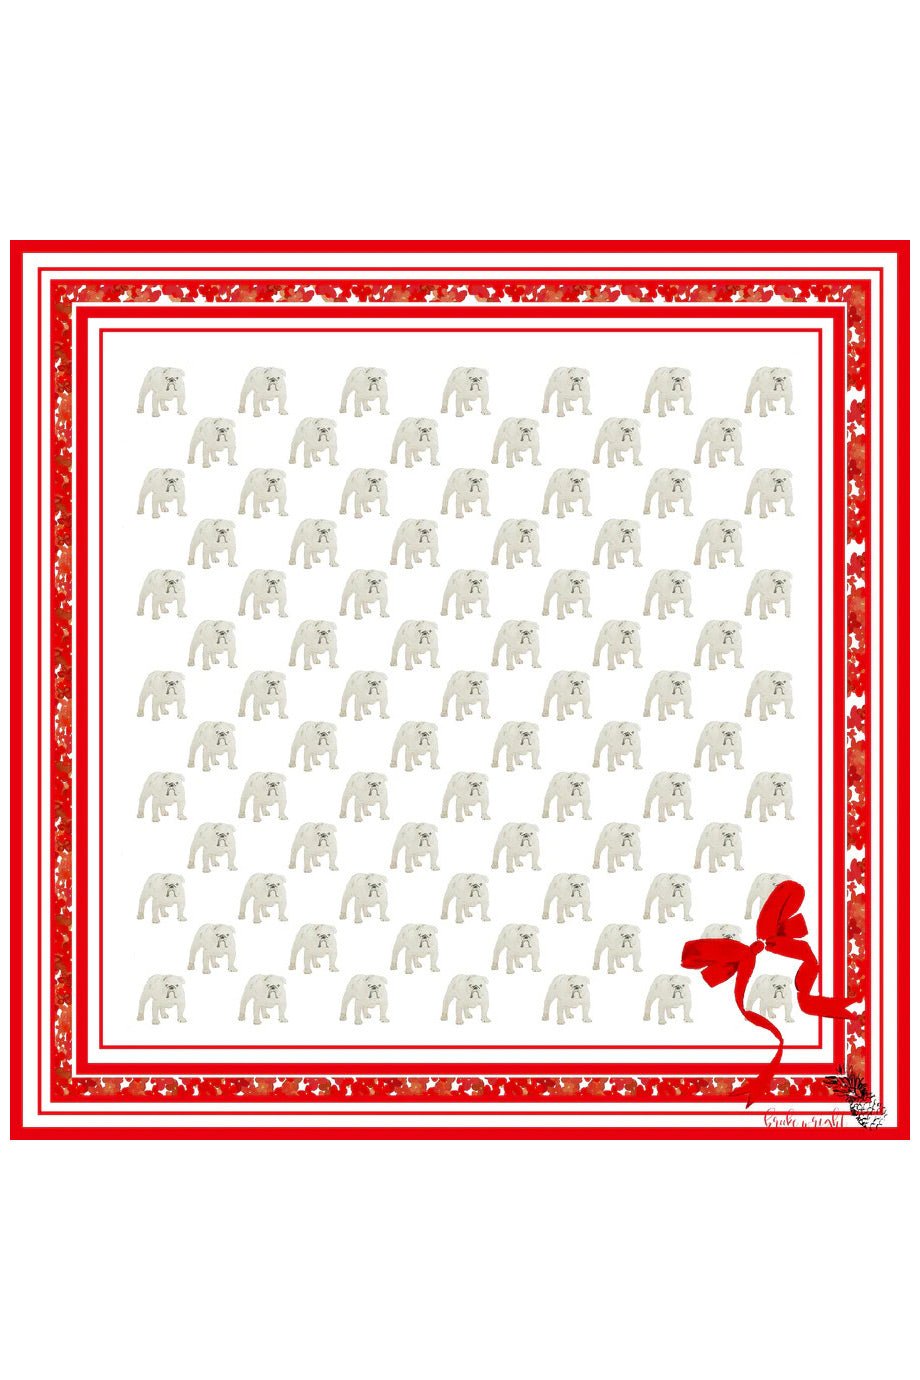 Red Silk Print Bulldogs Scarf - Brooke Wright - Color Game